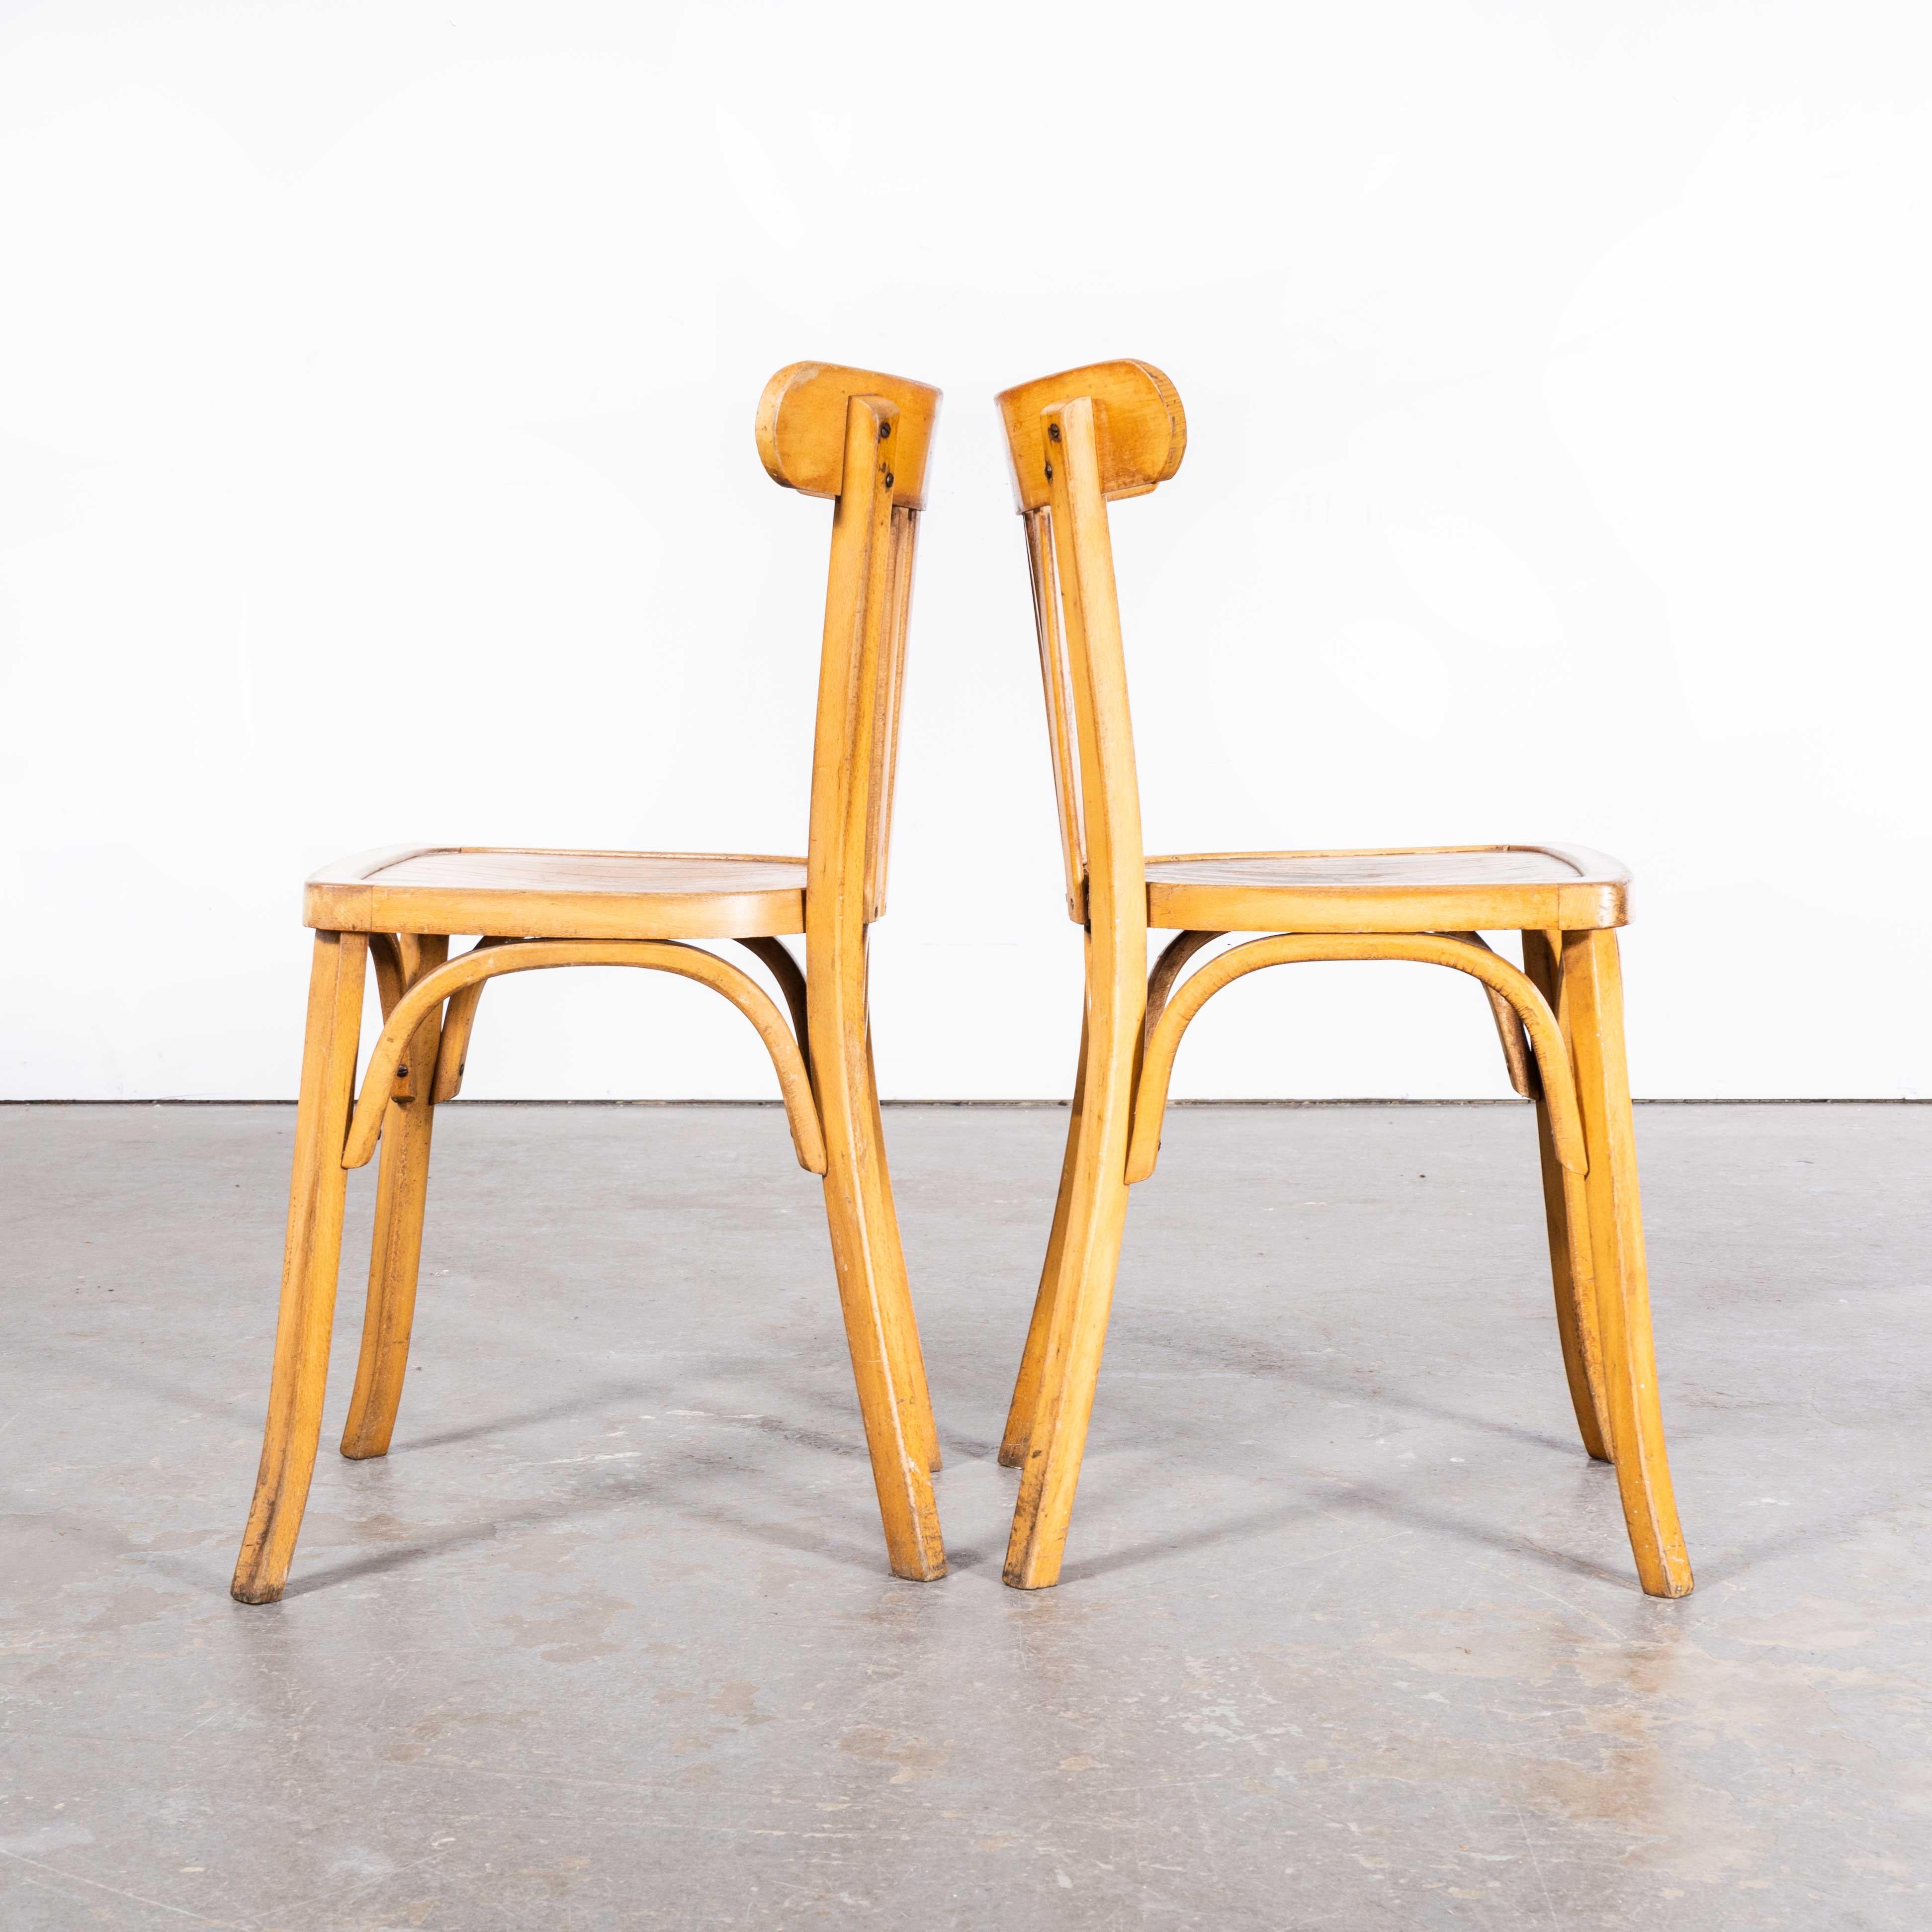 Mid-20th Century 1950s Luterma Blonde Oak Bentwood Dining Chair - Set of Pair For Sale